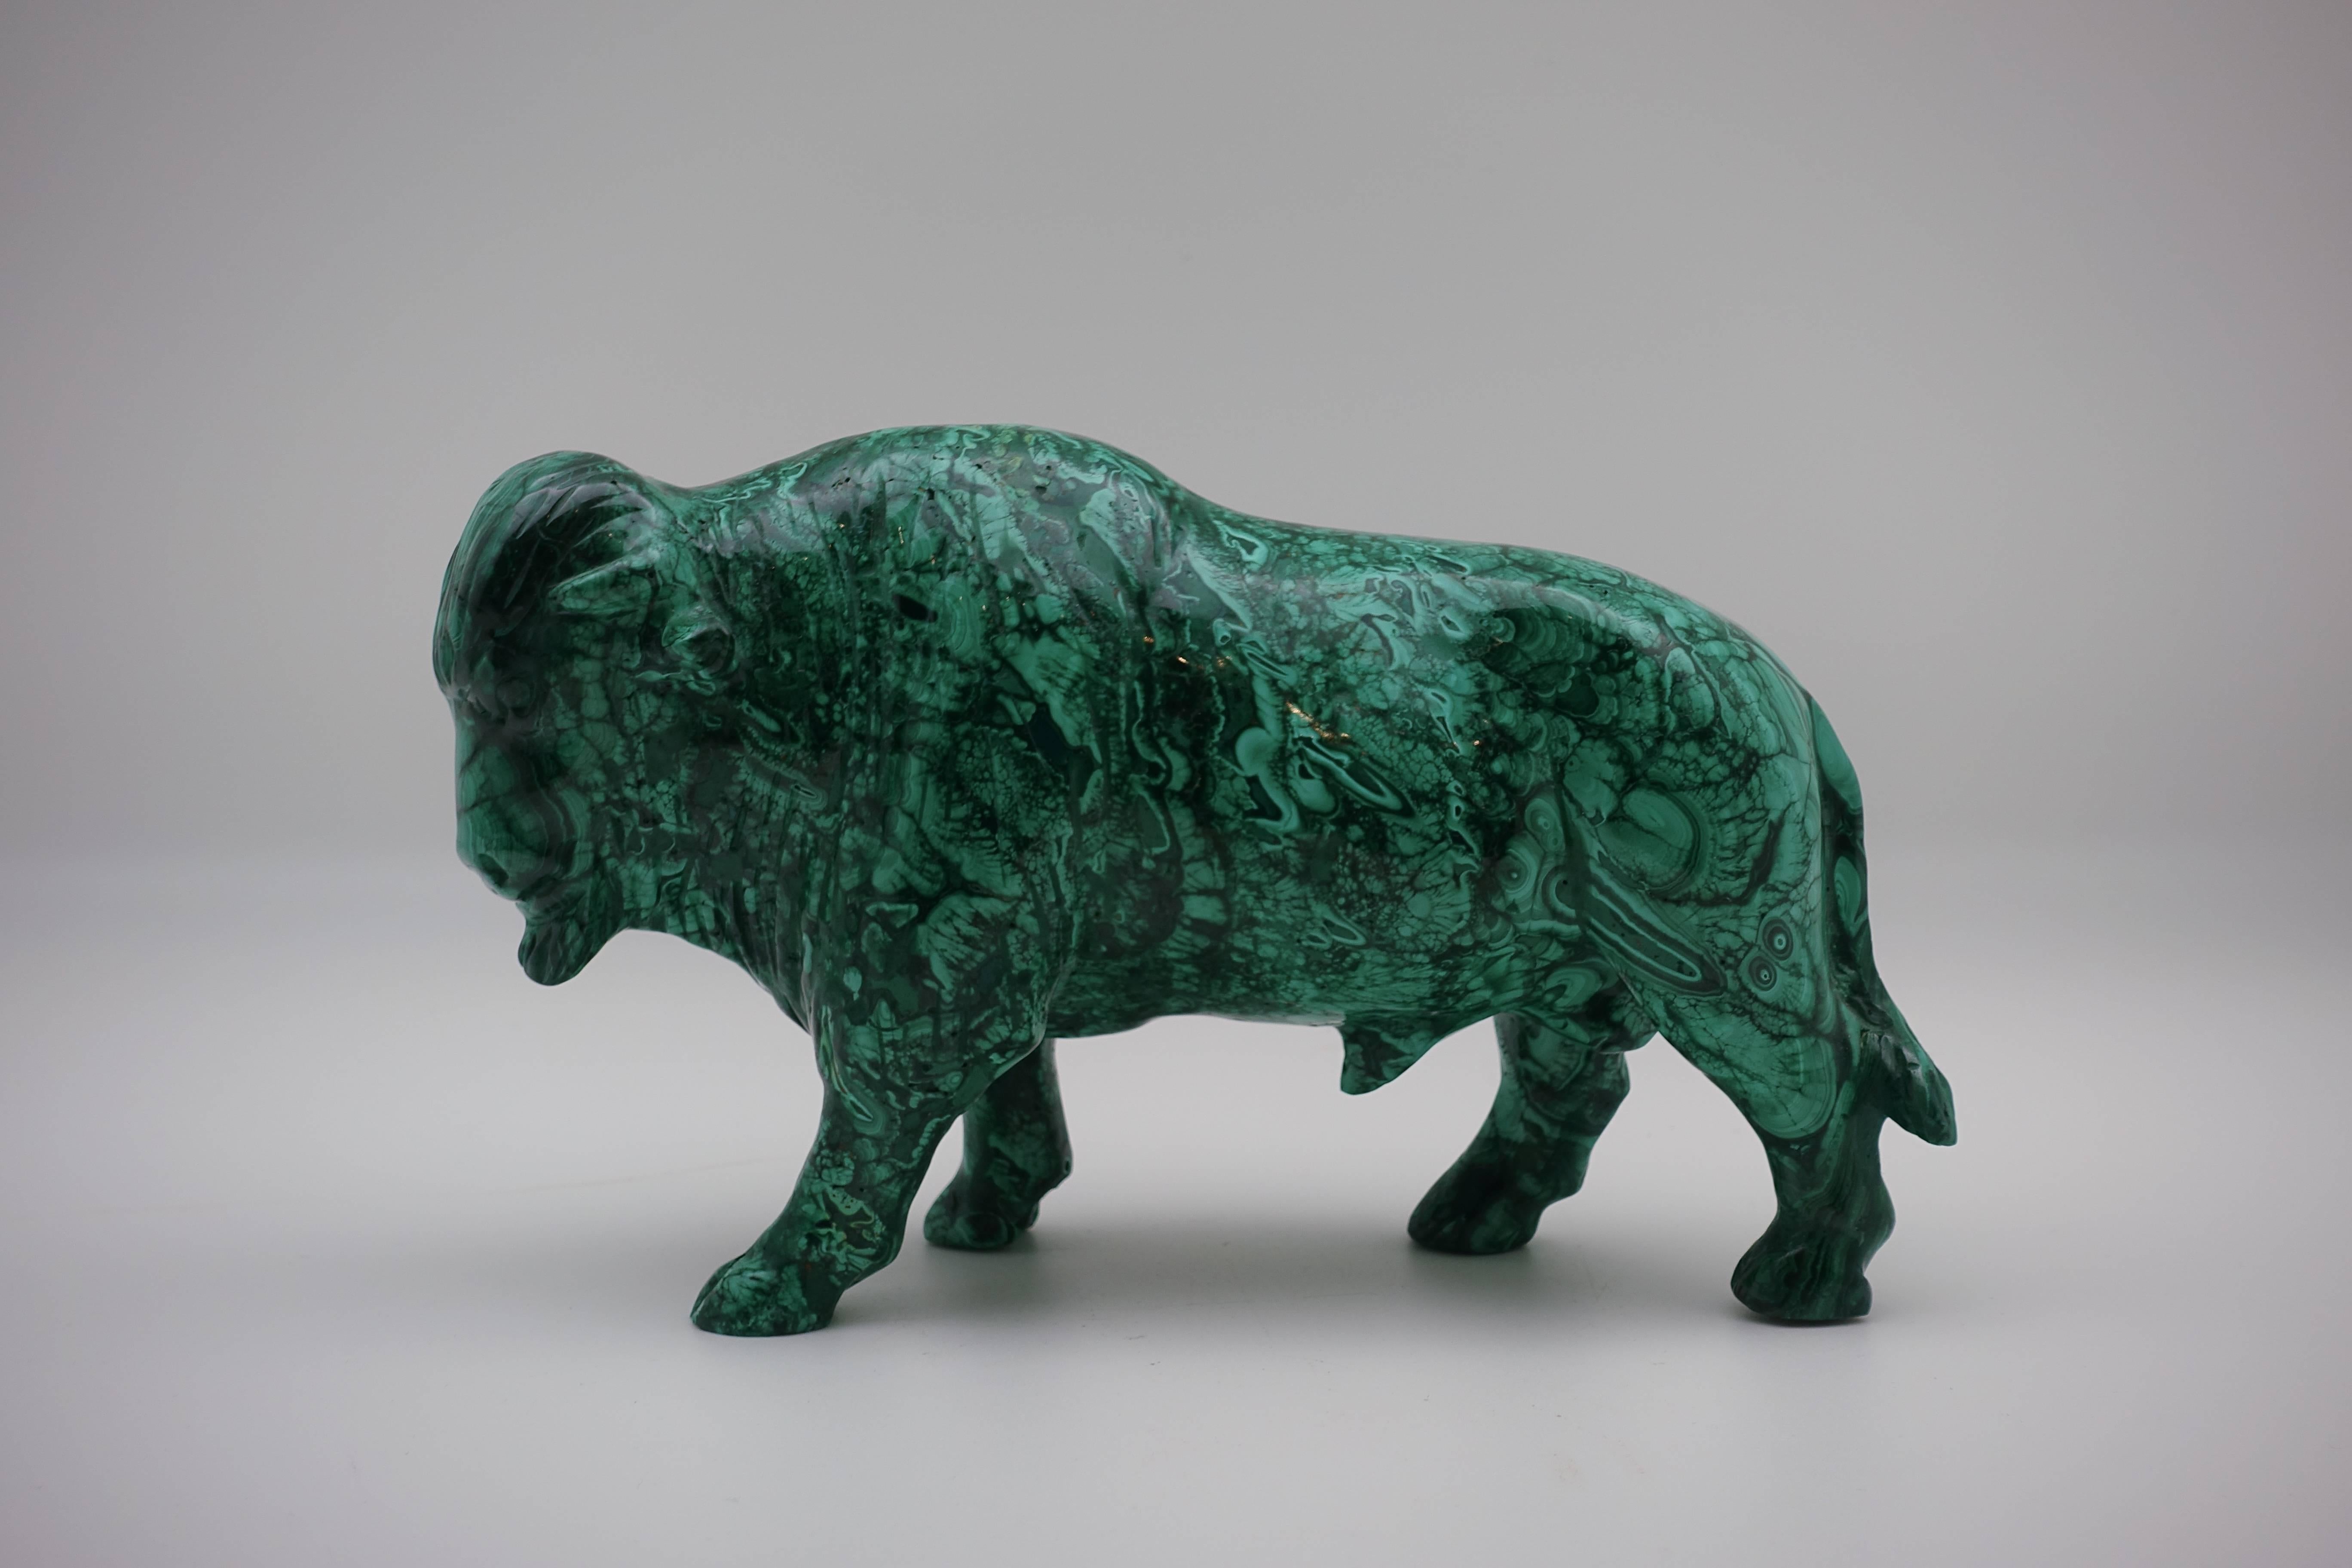 The malachite for this carving was sourced from the Congo where the finest quality of this mineral is currently found. Malachite from the 18th and 19th century was also sourced from Russia. Carvings, such as this, were typically brought back from